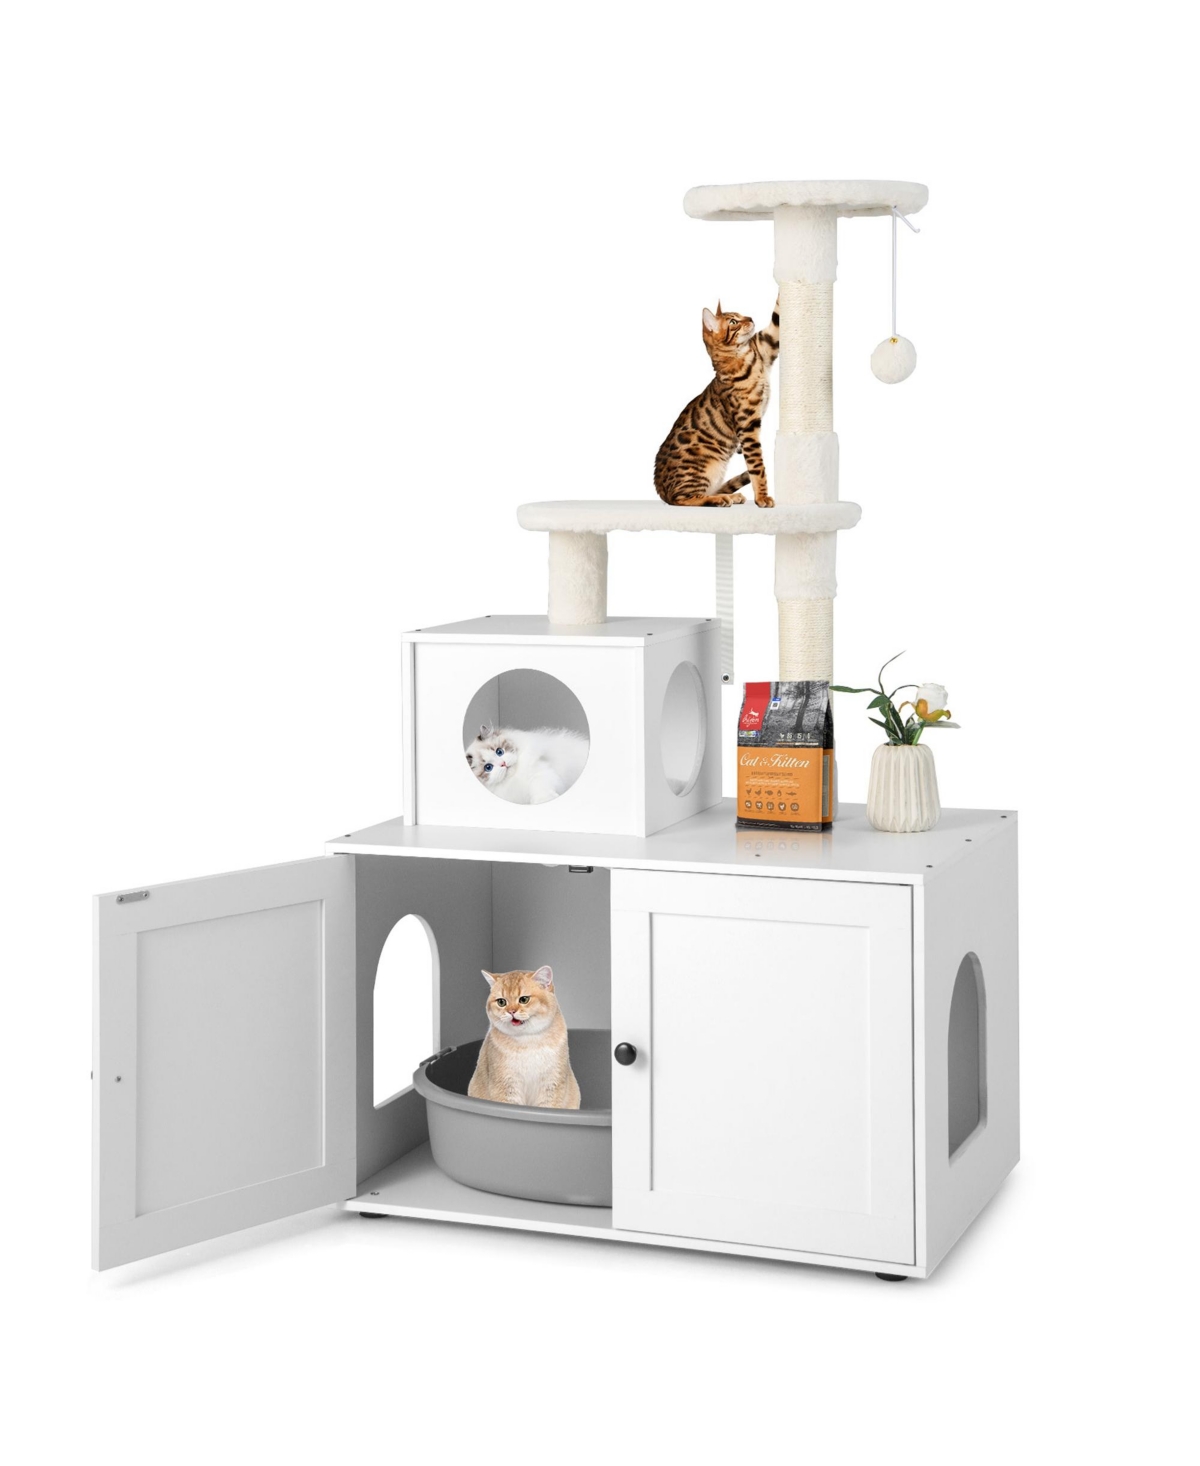 2-in-1 Wooden Litter Box Enclosure with Cat Tree Hidden Washroom Furniture - White